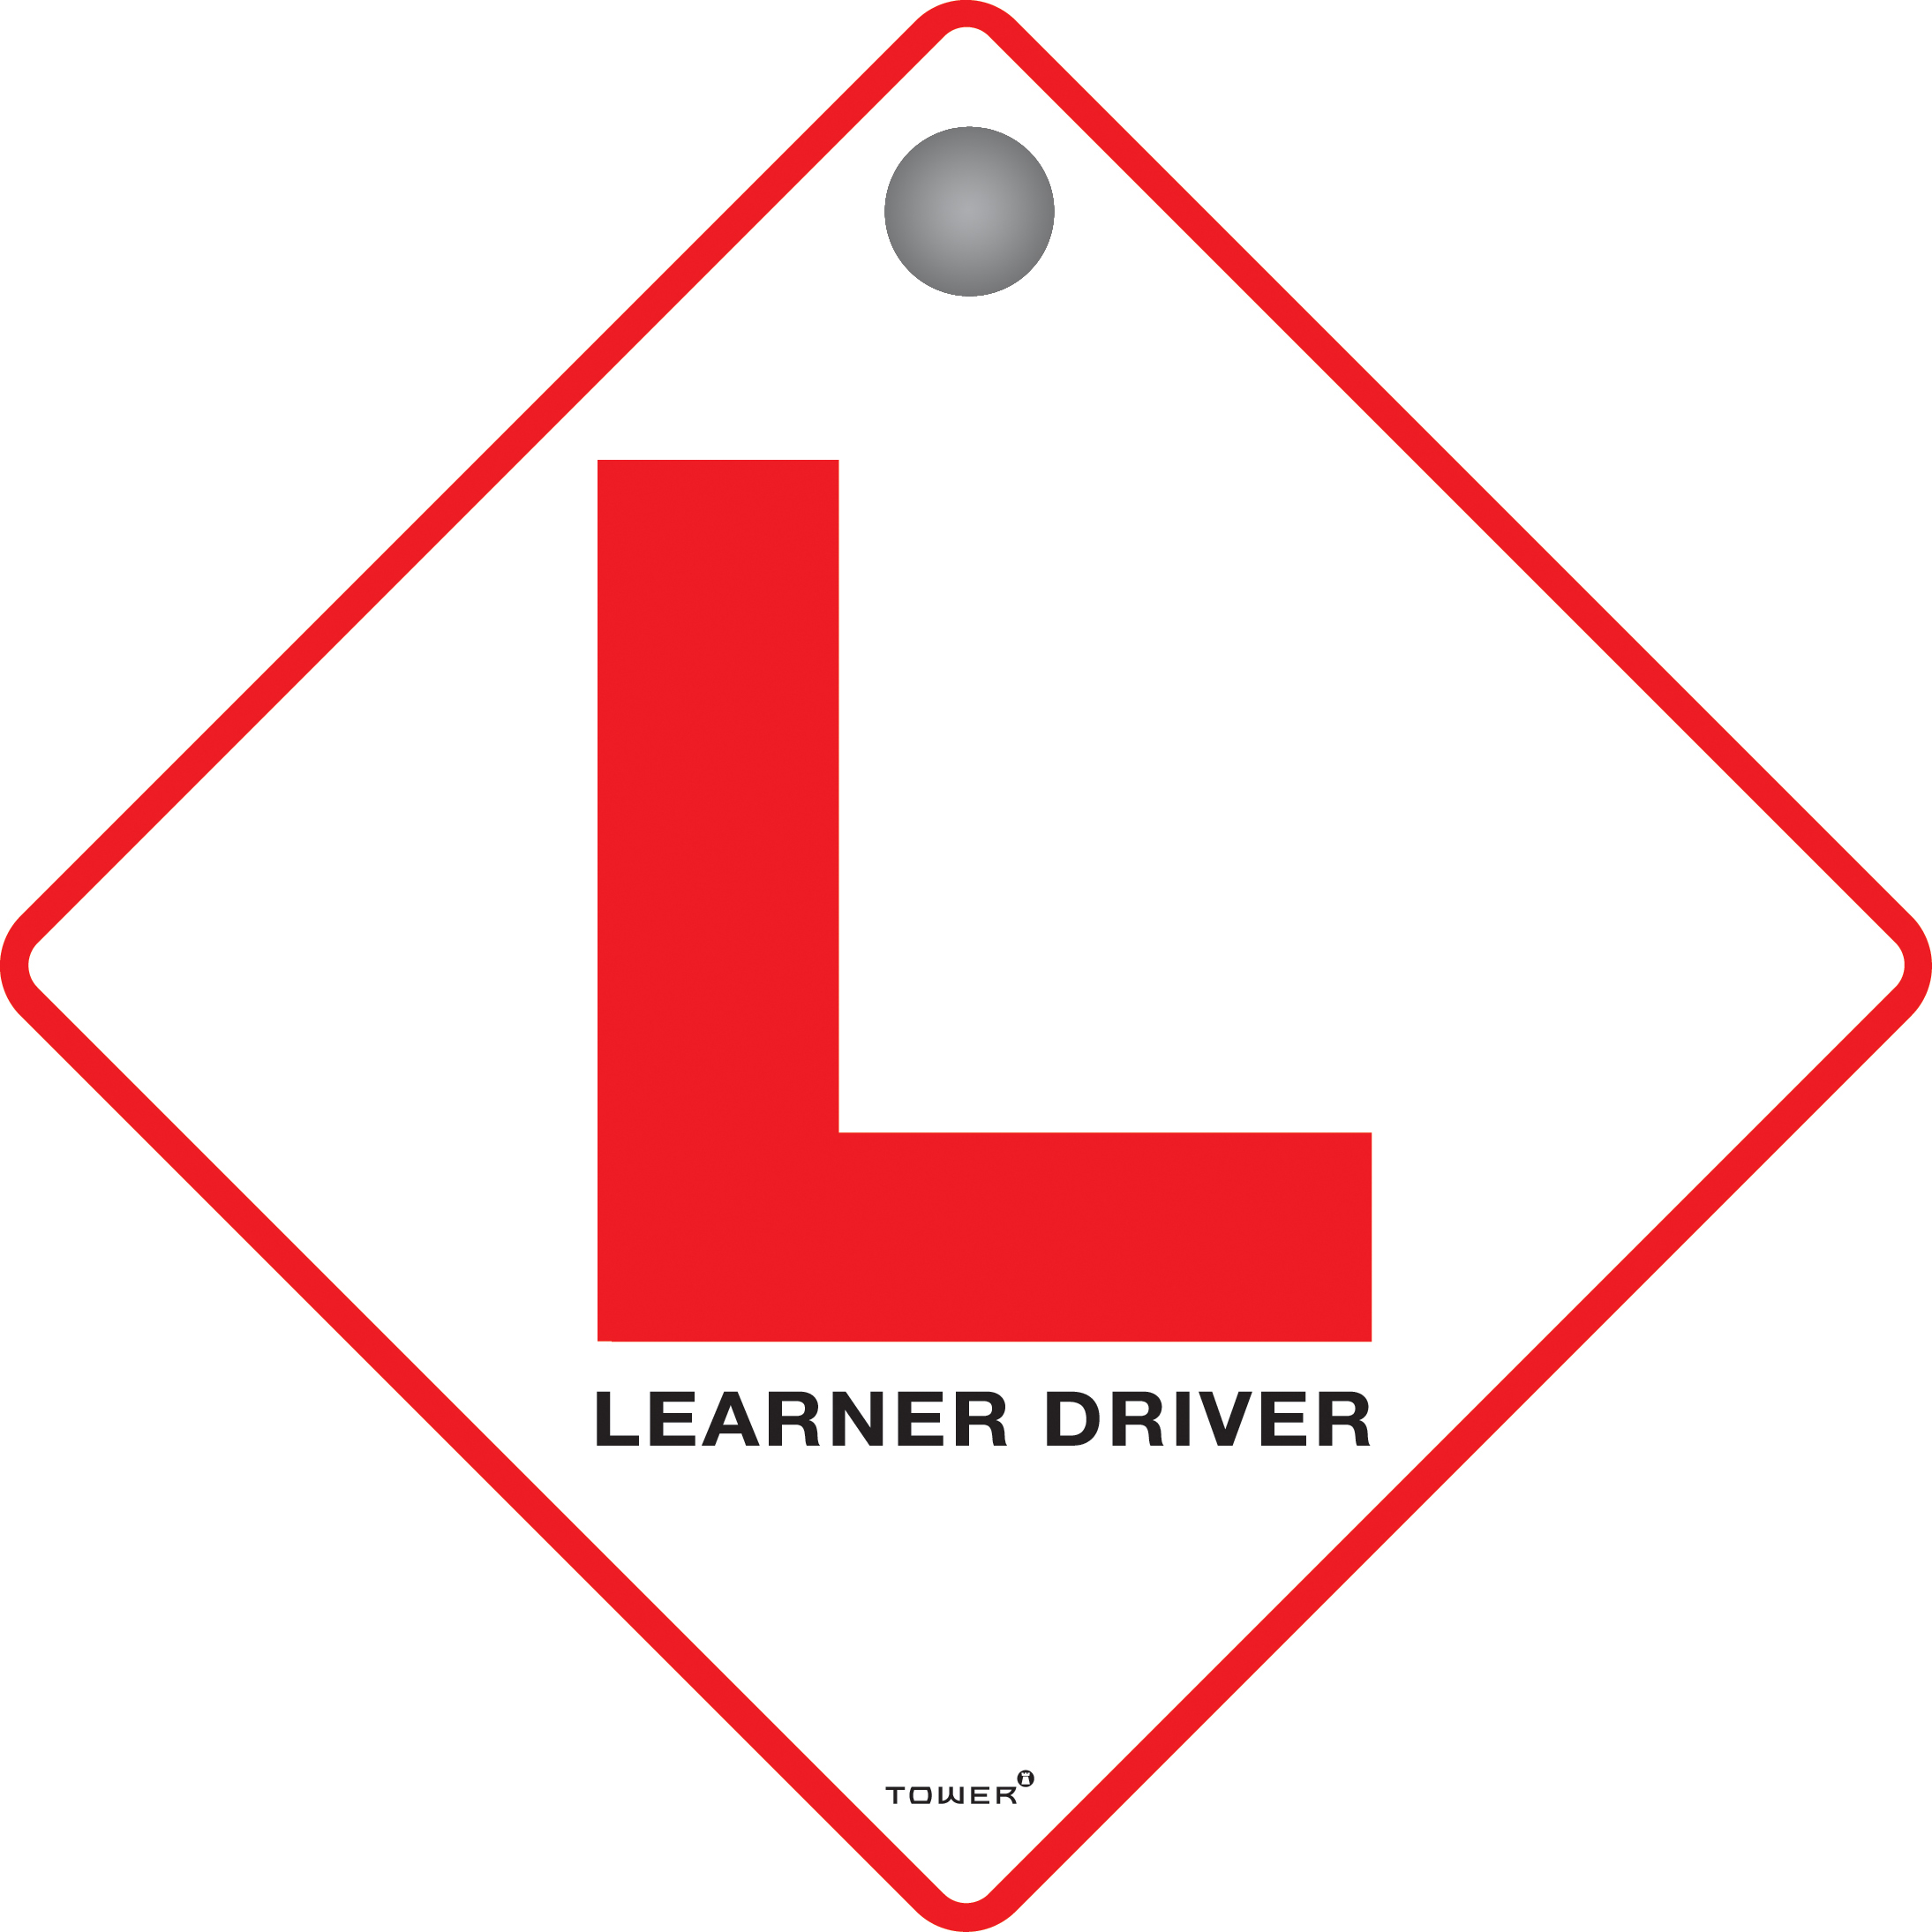 Driving clipart learner driver. How to get a